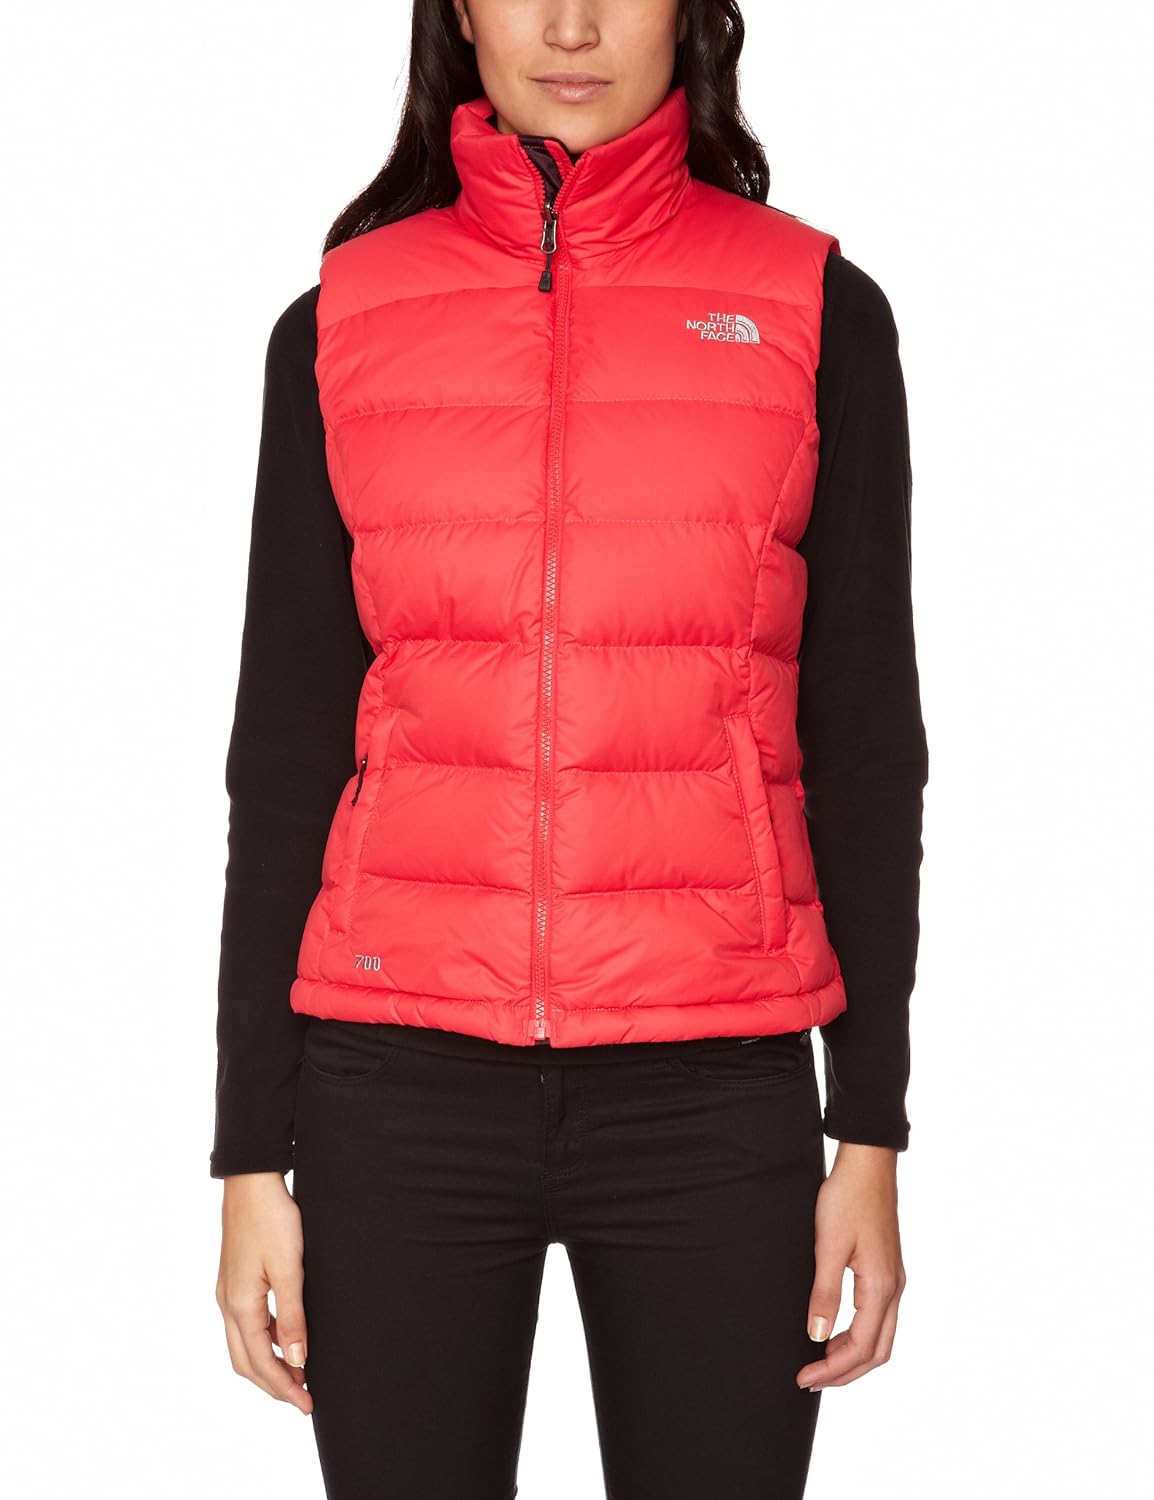 North Face Women's Winter Jacket is renowned for its high-quality winter jackets that offer both warmth and style.